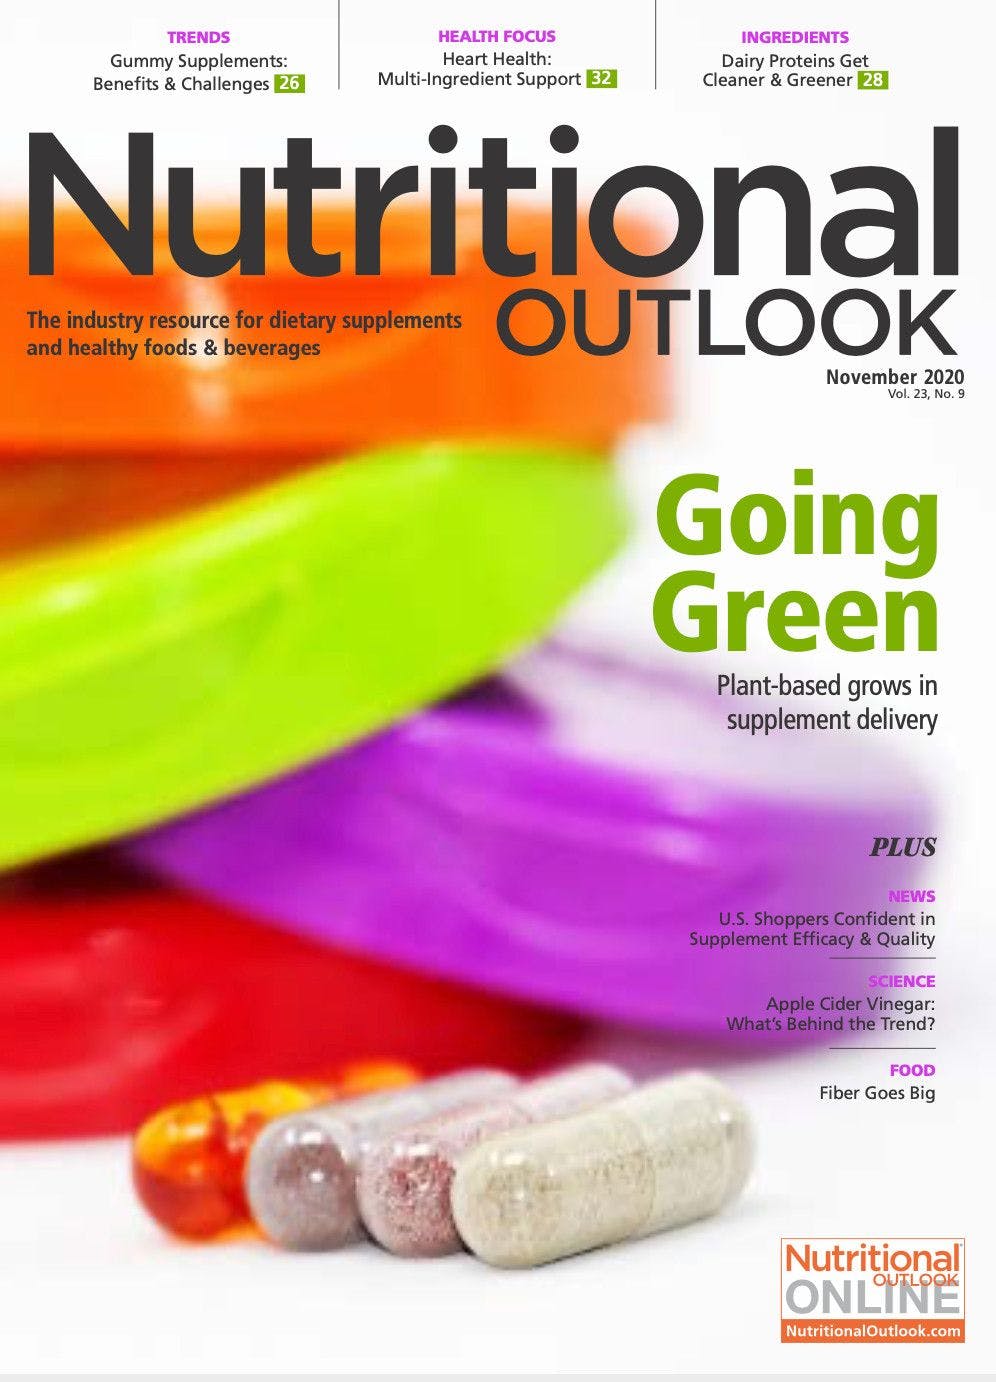 Nutritional Outlook Vol. 23 No. 9